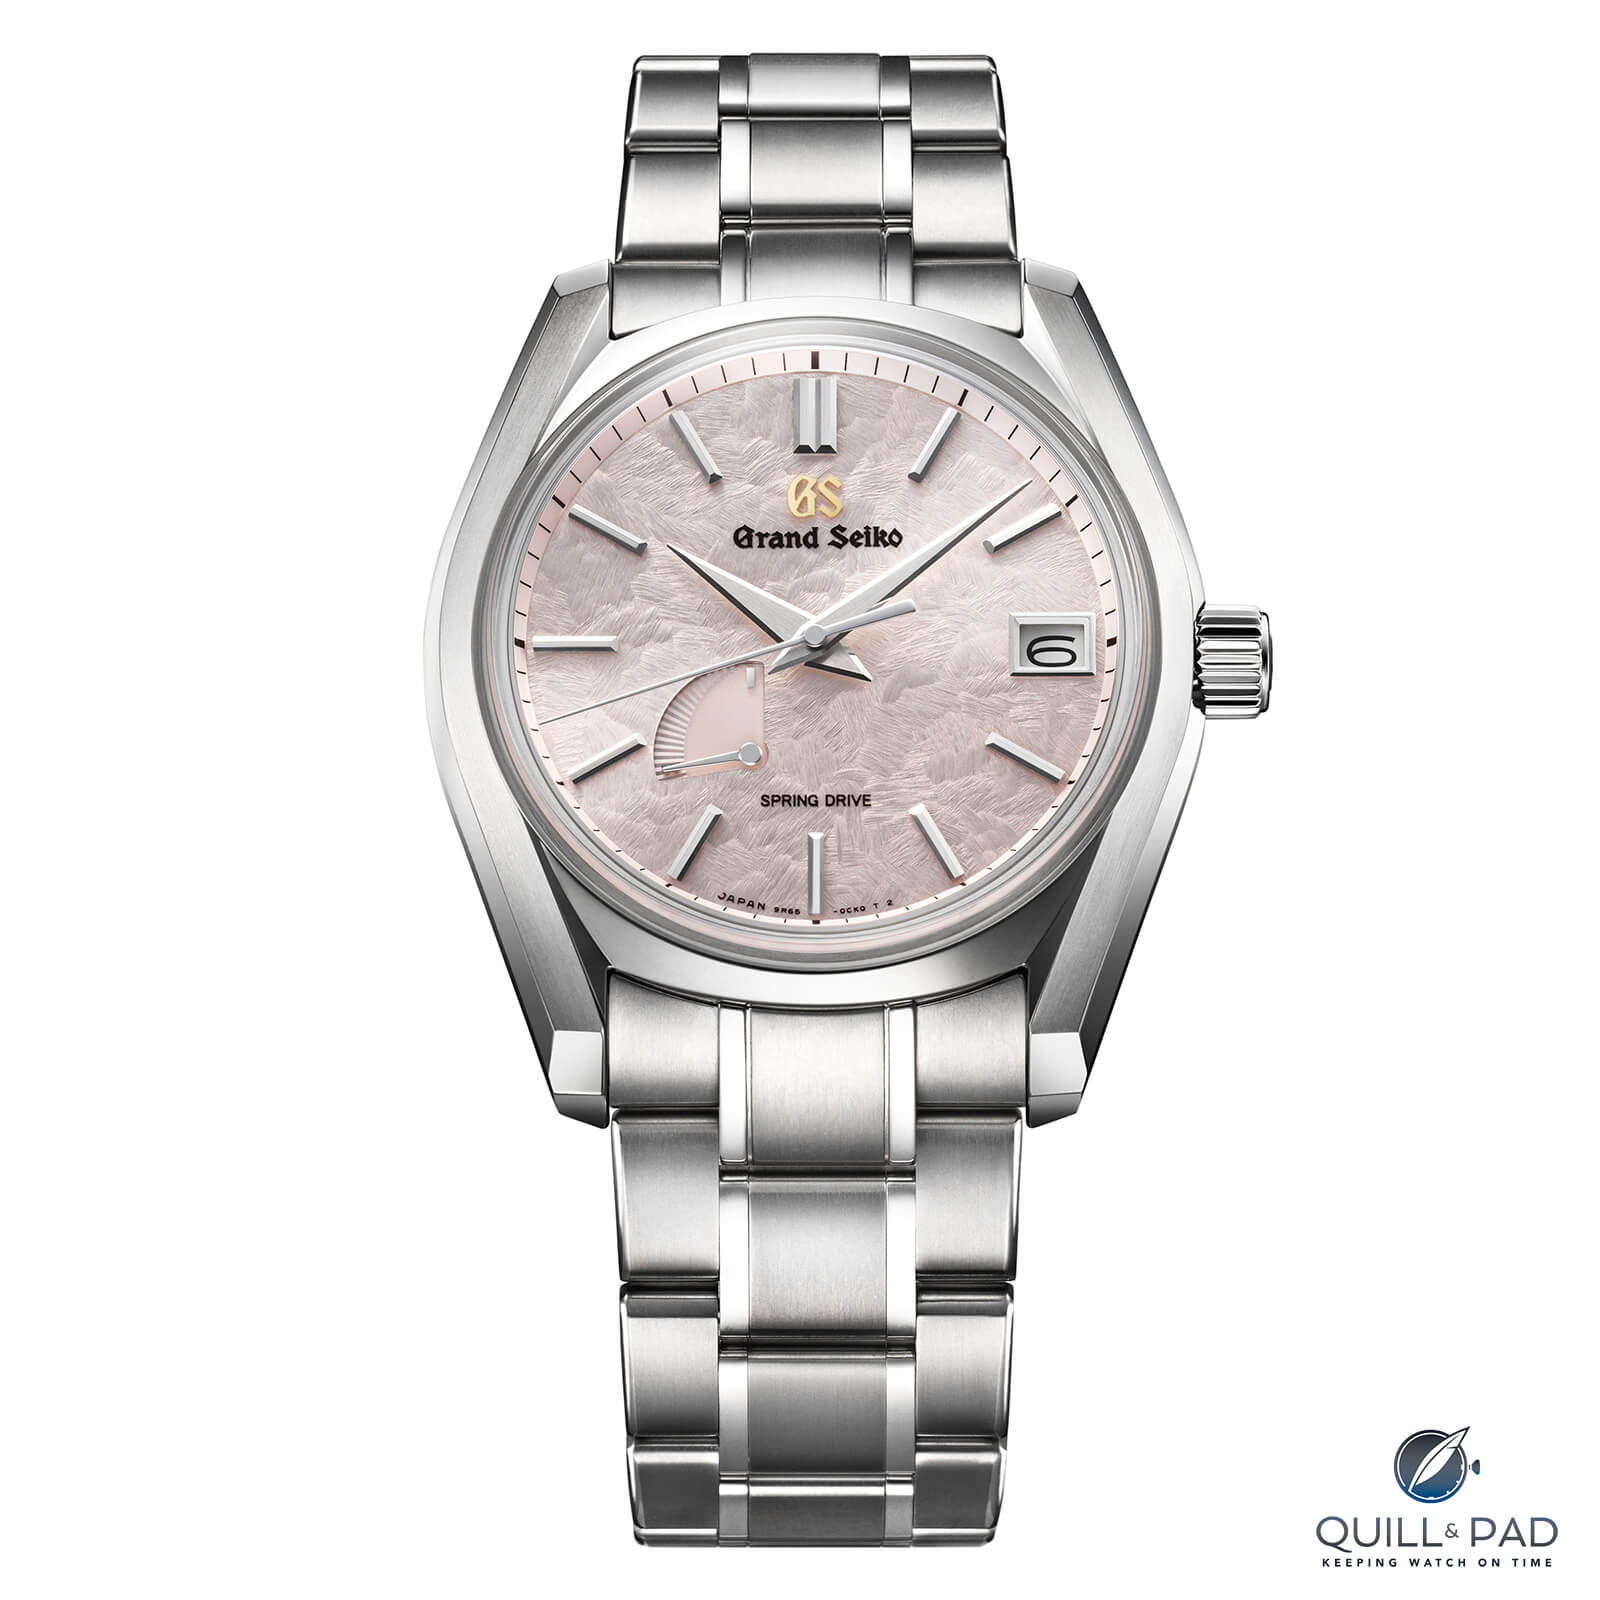 Grand Seiko Nature Of Time: 4 Watches For 24 Seasons - Quill & Pad